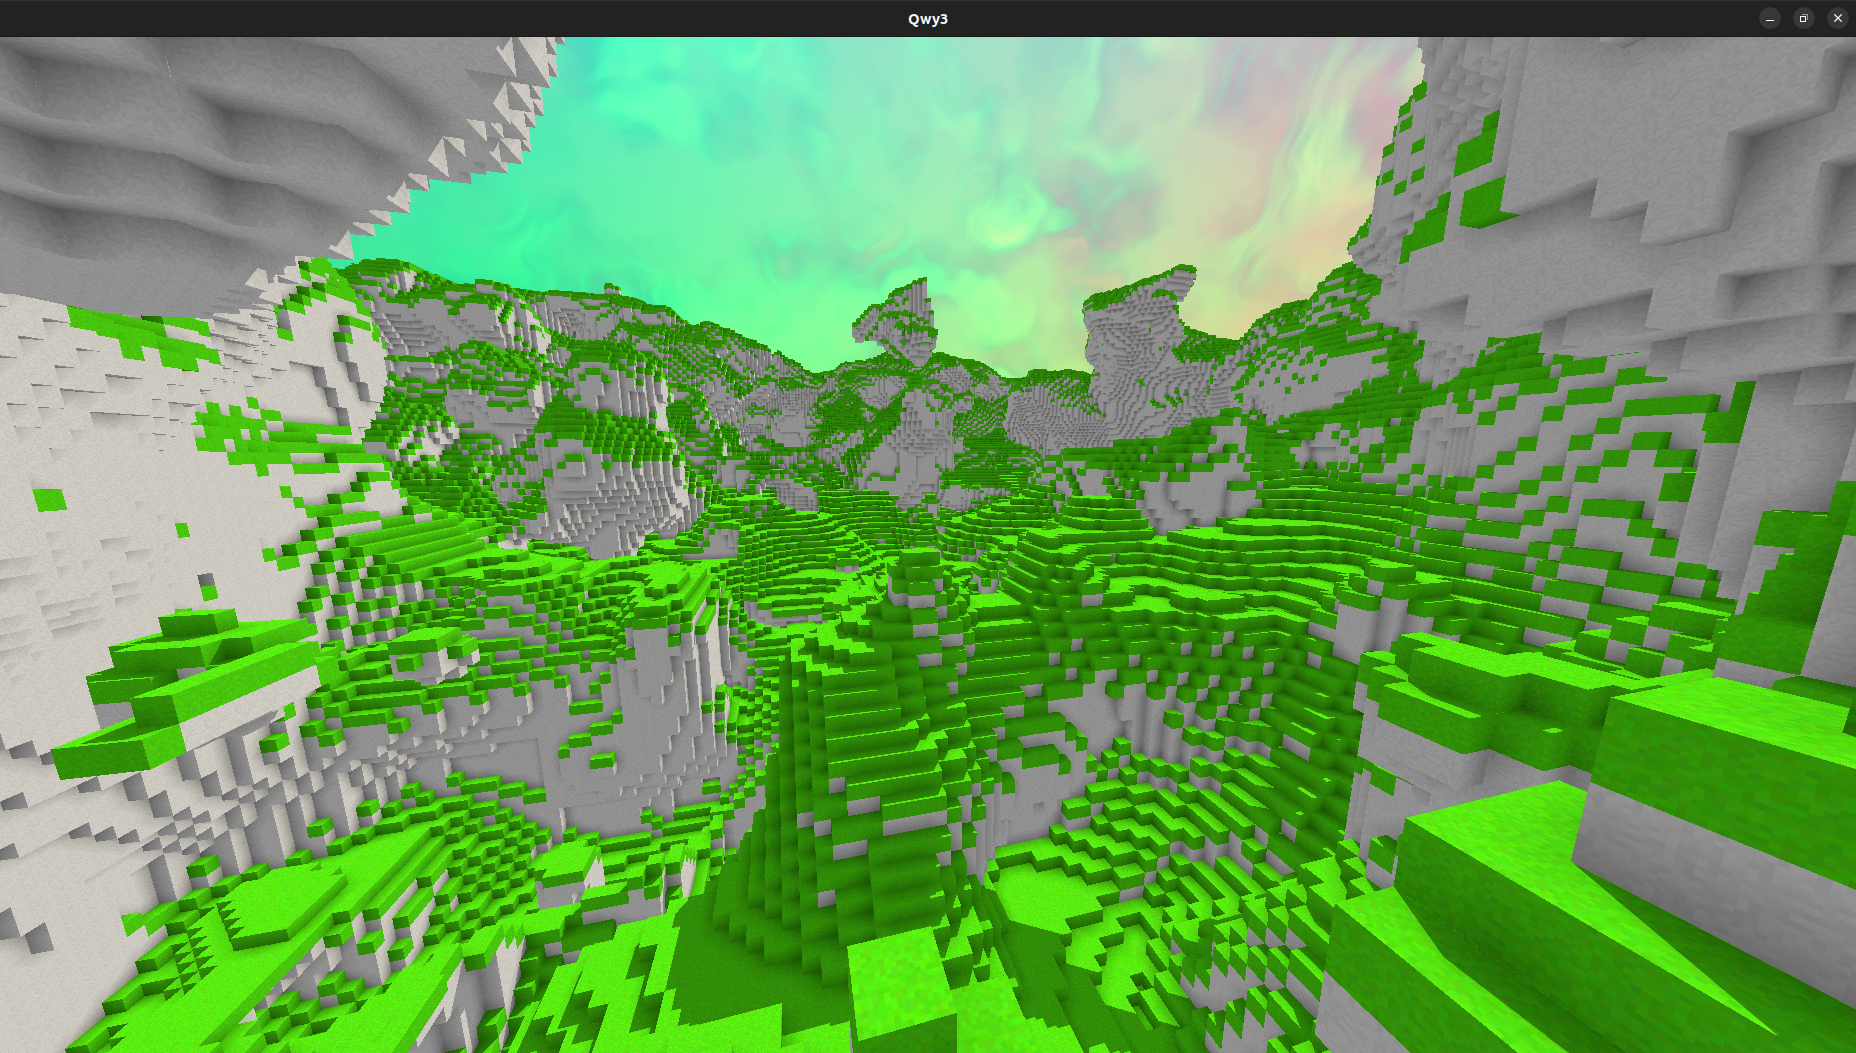 Image of some terrain generation based on noise in a way discovered by chance.